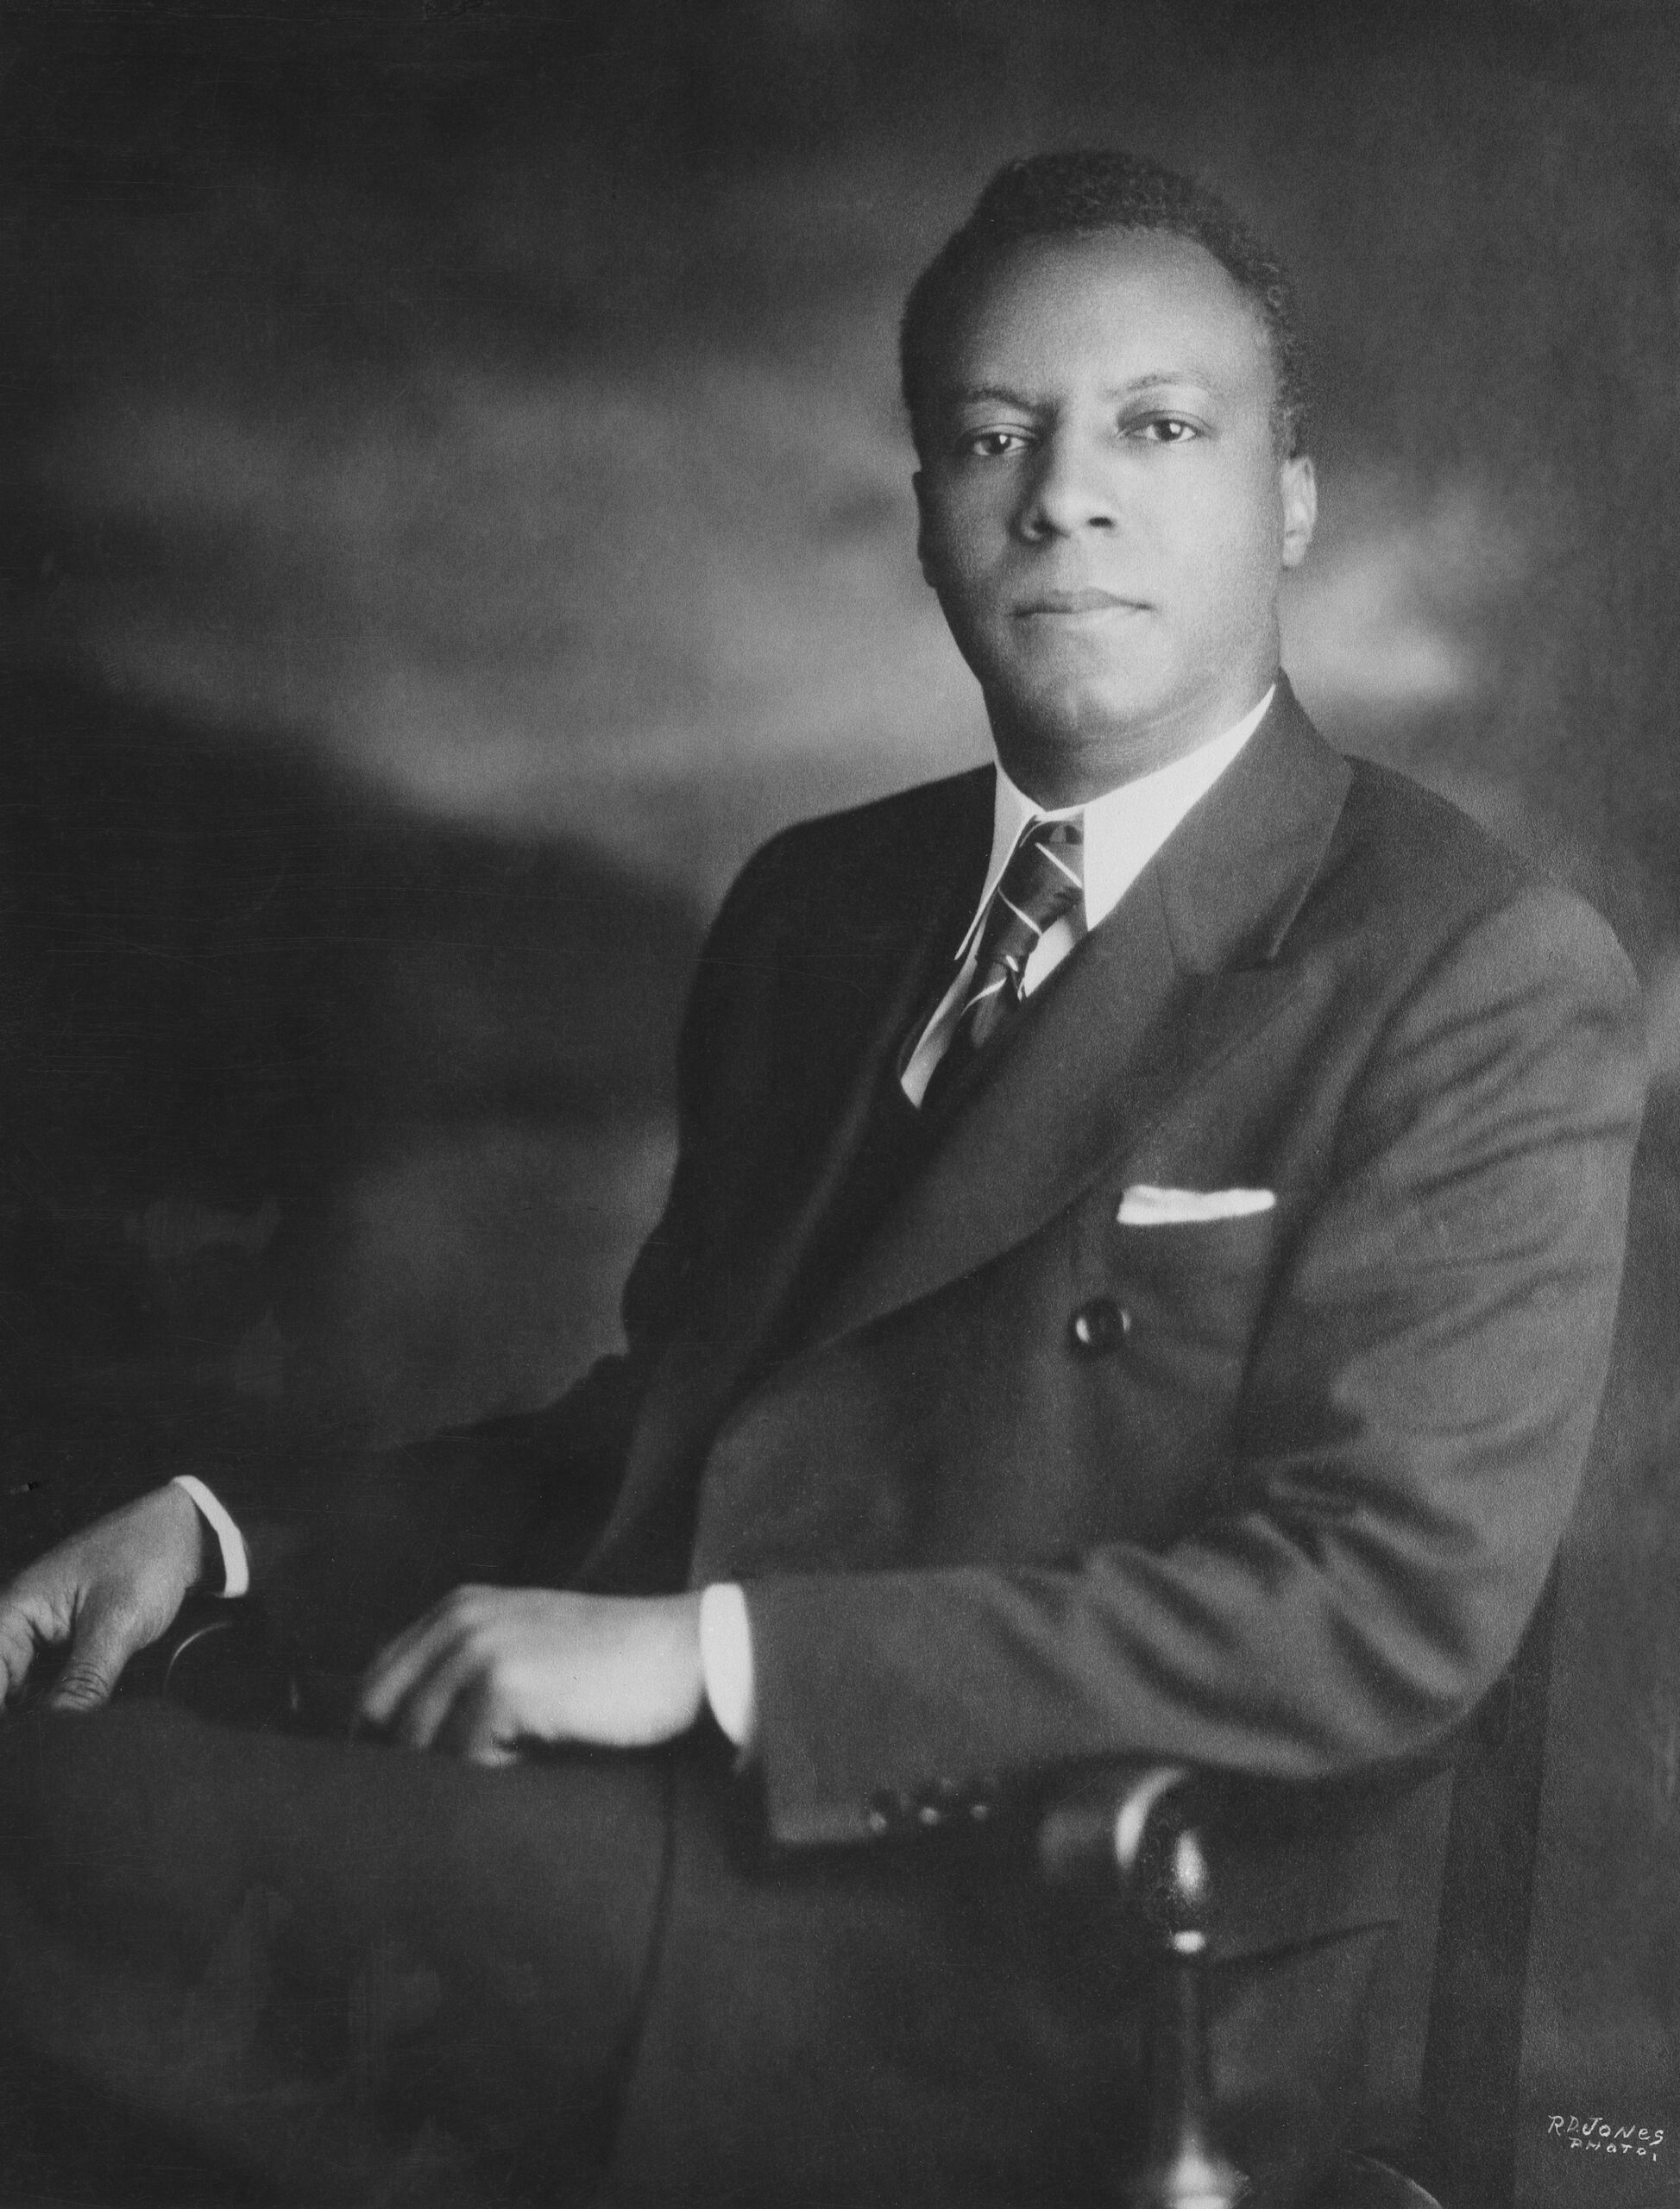 Seated black and white portrait of A. Philip Randolph